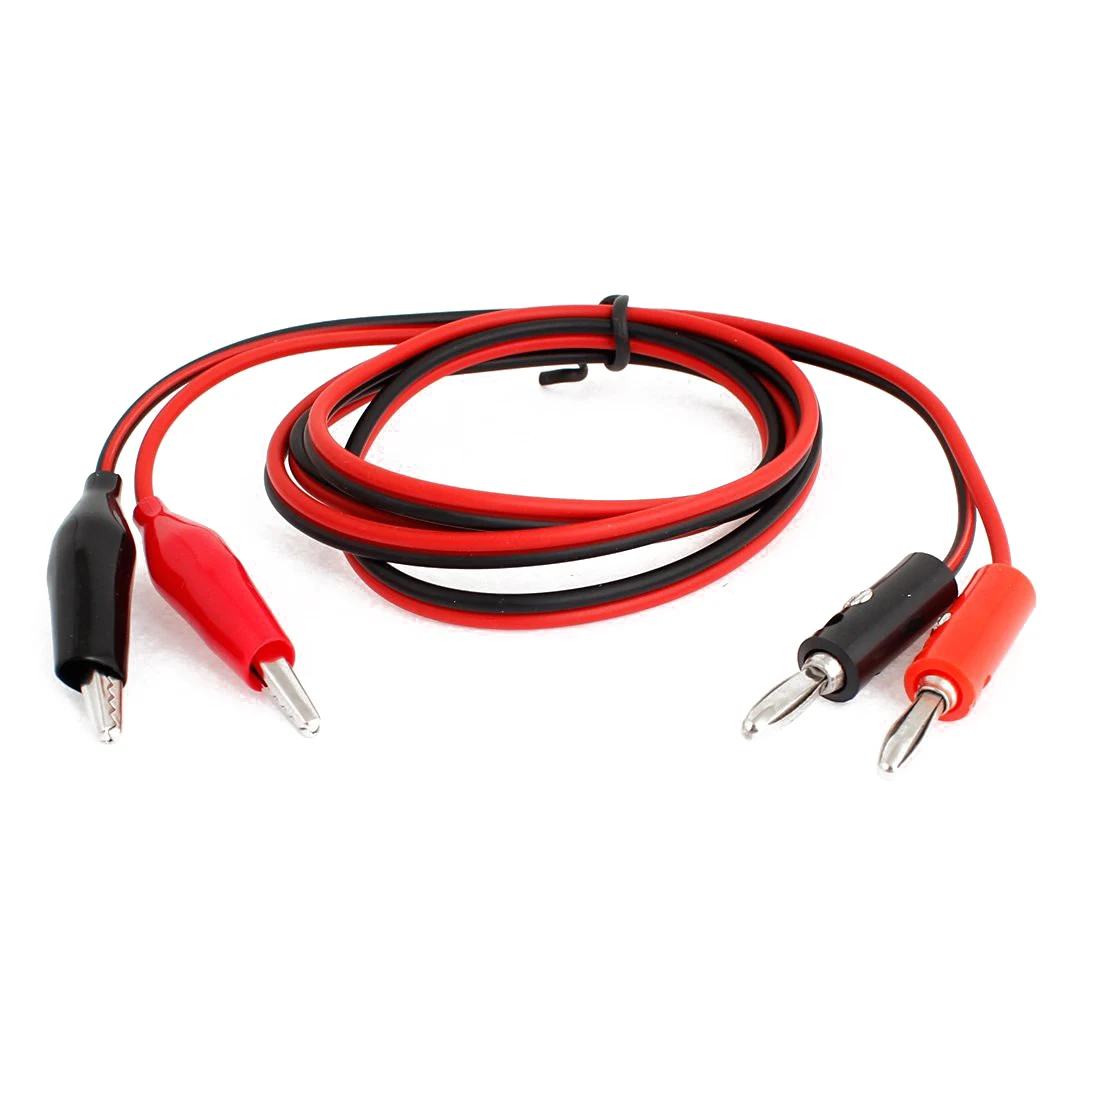 New 3ft Universal Alligator Clip to Banana Plug Probe Multimeter Test Lead Cable 